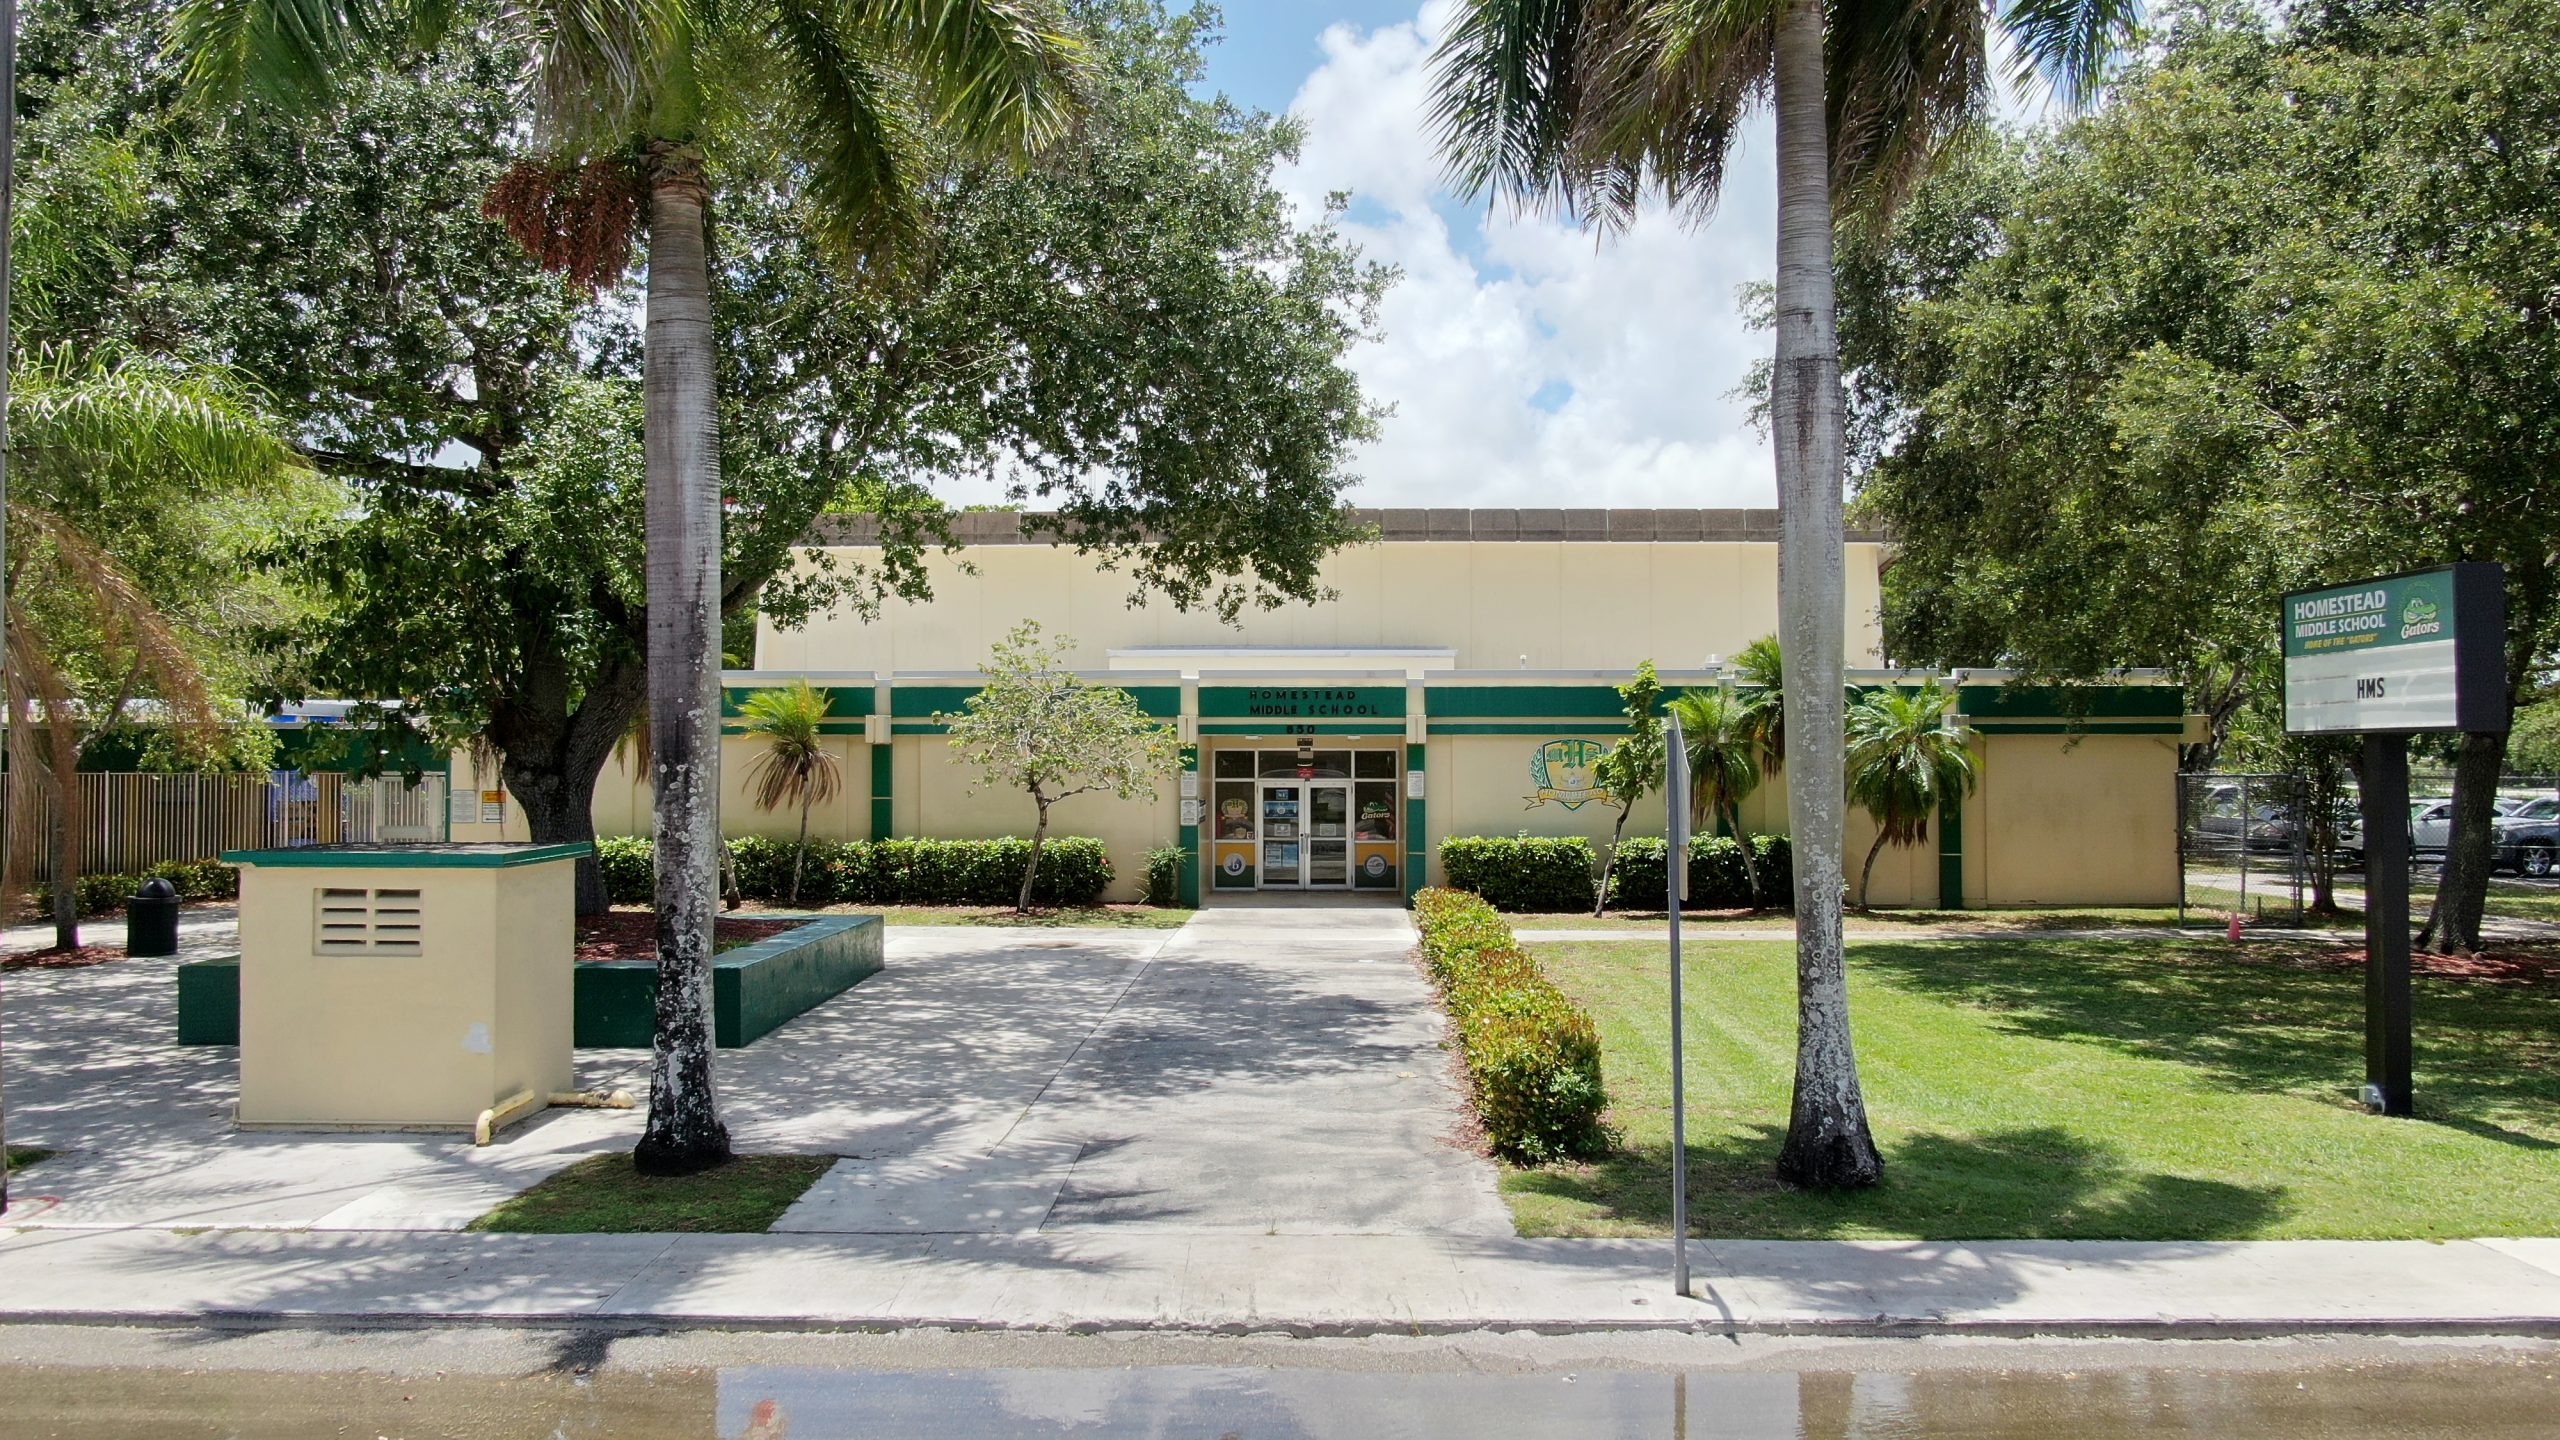 Homestead Middle School – Home of the Gators